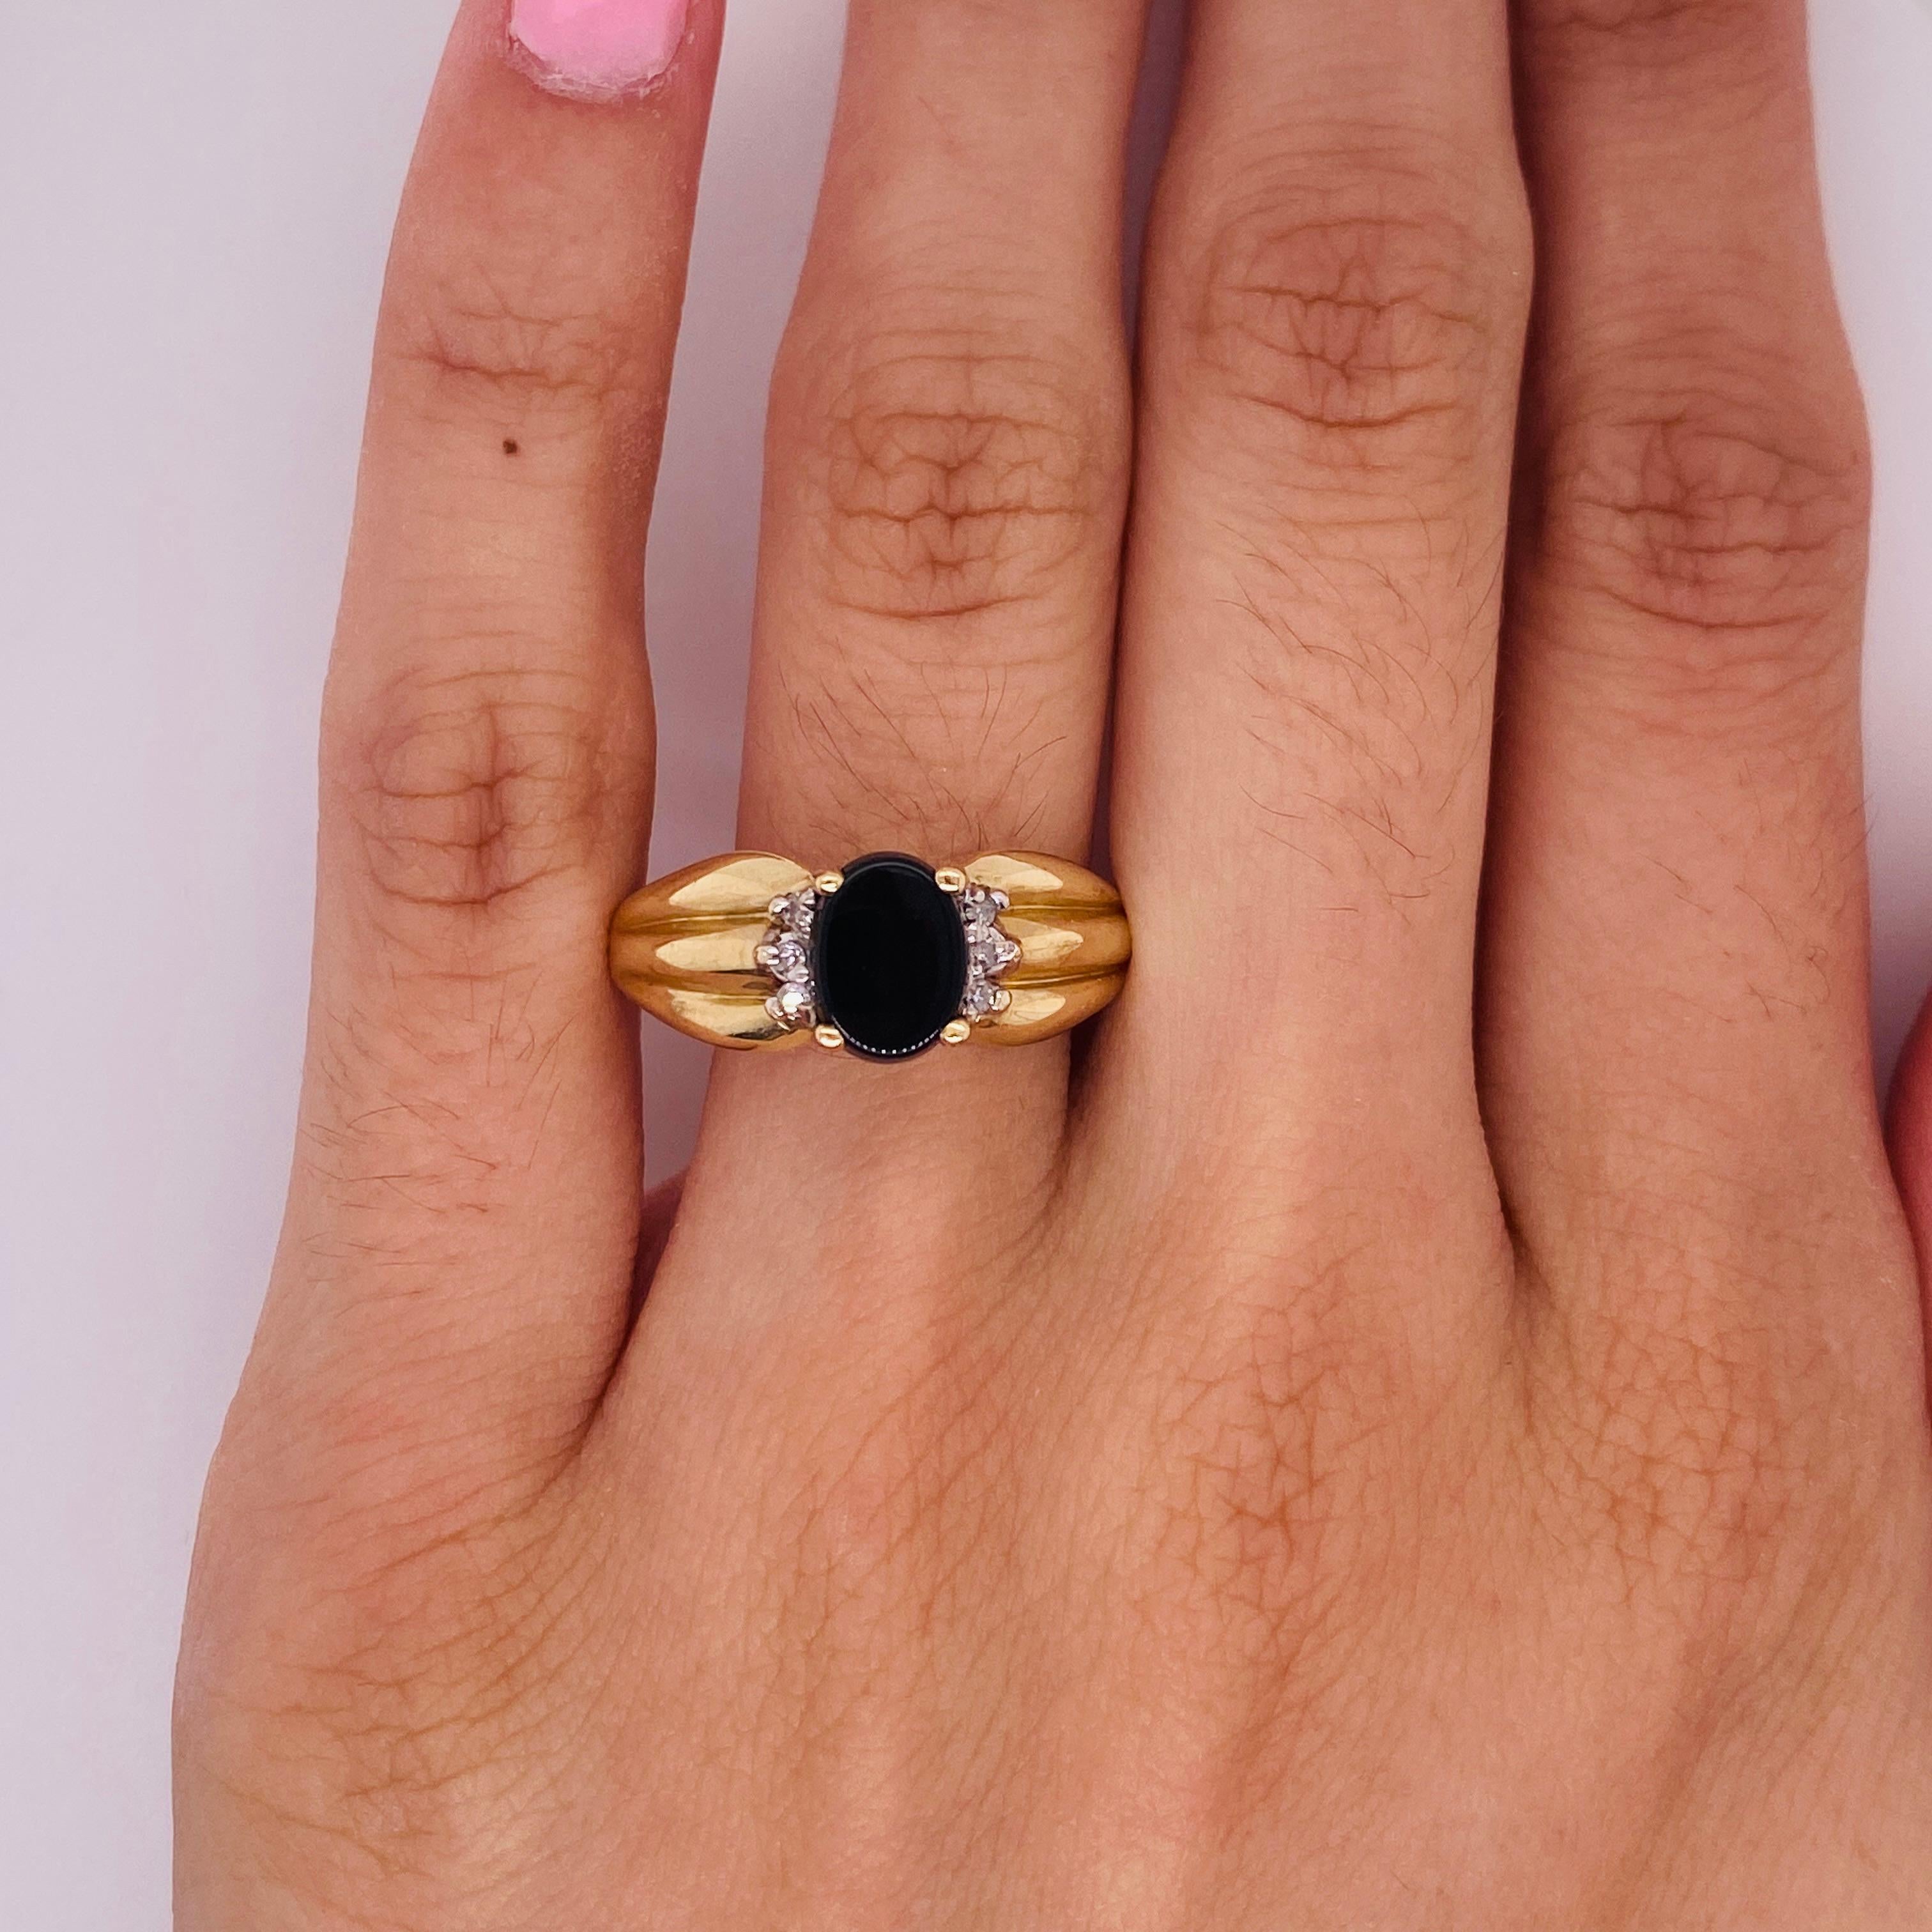 This ring could be perfect for your lover of sleek sophistication! The black onyx gemstone speaks of strength and hidden depths while the curves of the oval speak of fluid grace. Centered by the ribbed shoulders of the ring, the 0.63 carat onyx